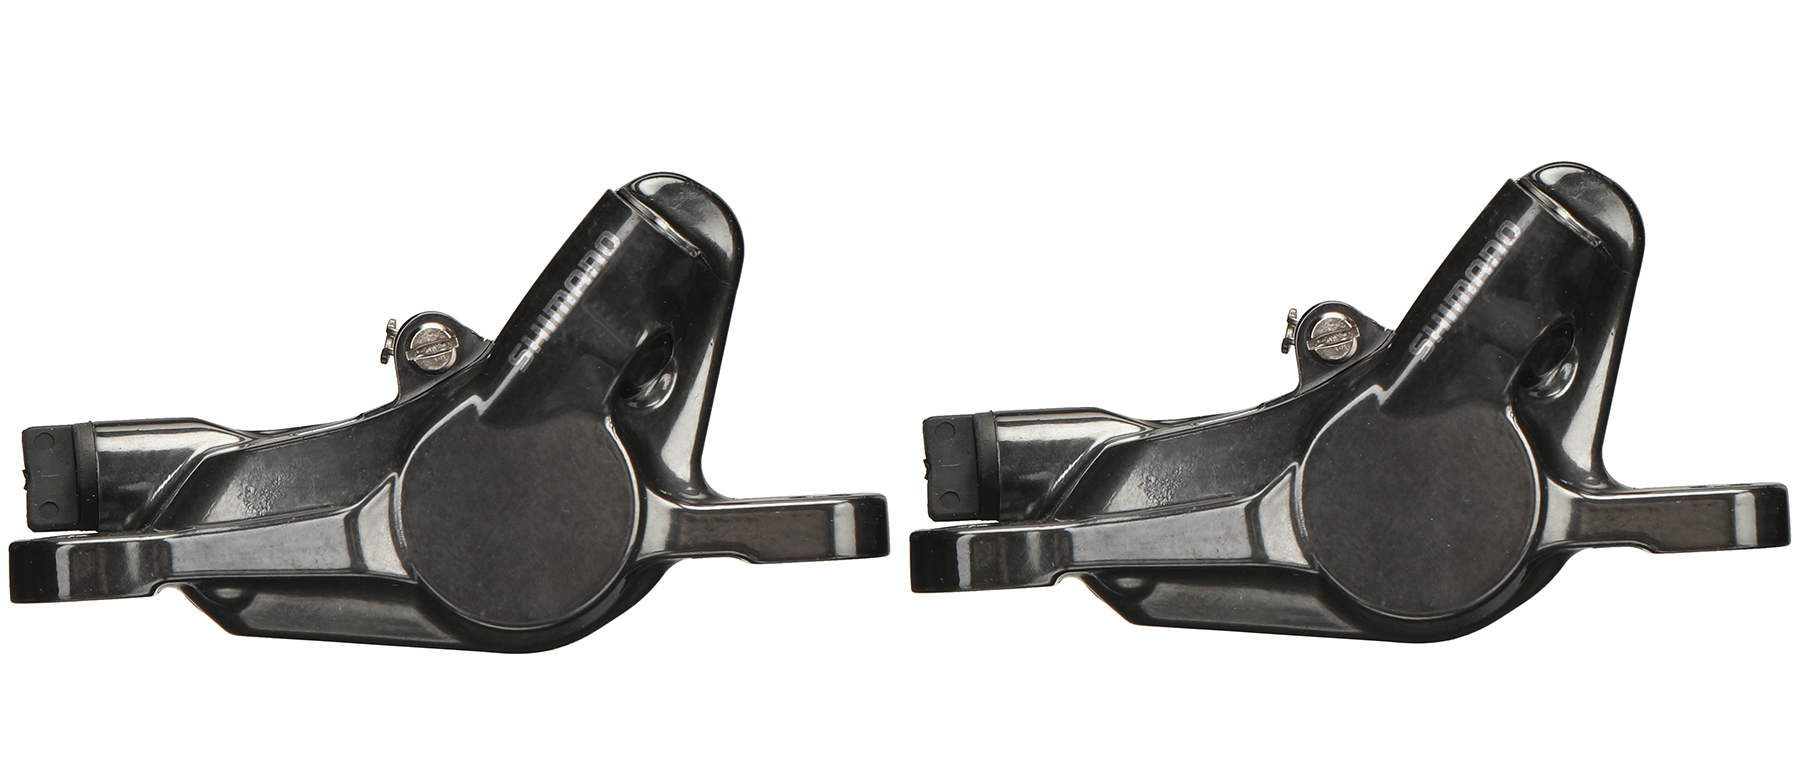 Shimano ST-R785 Di2 Dual Control Lever Set with Calipers